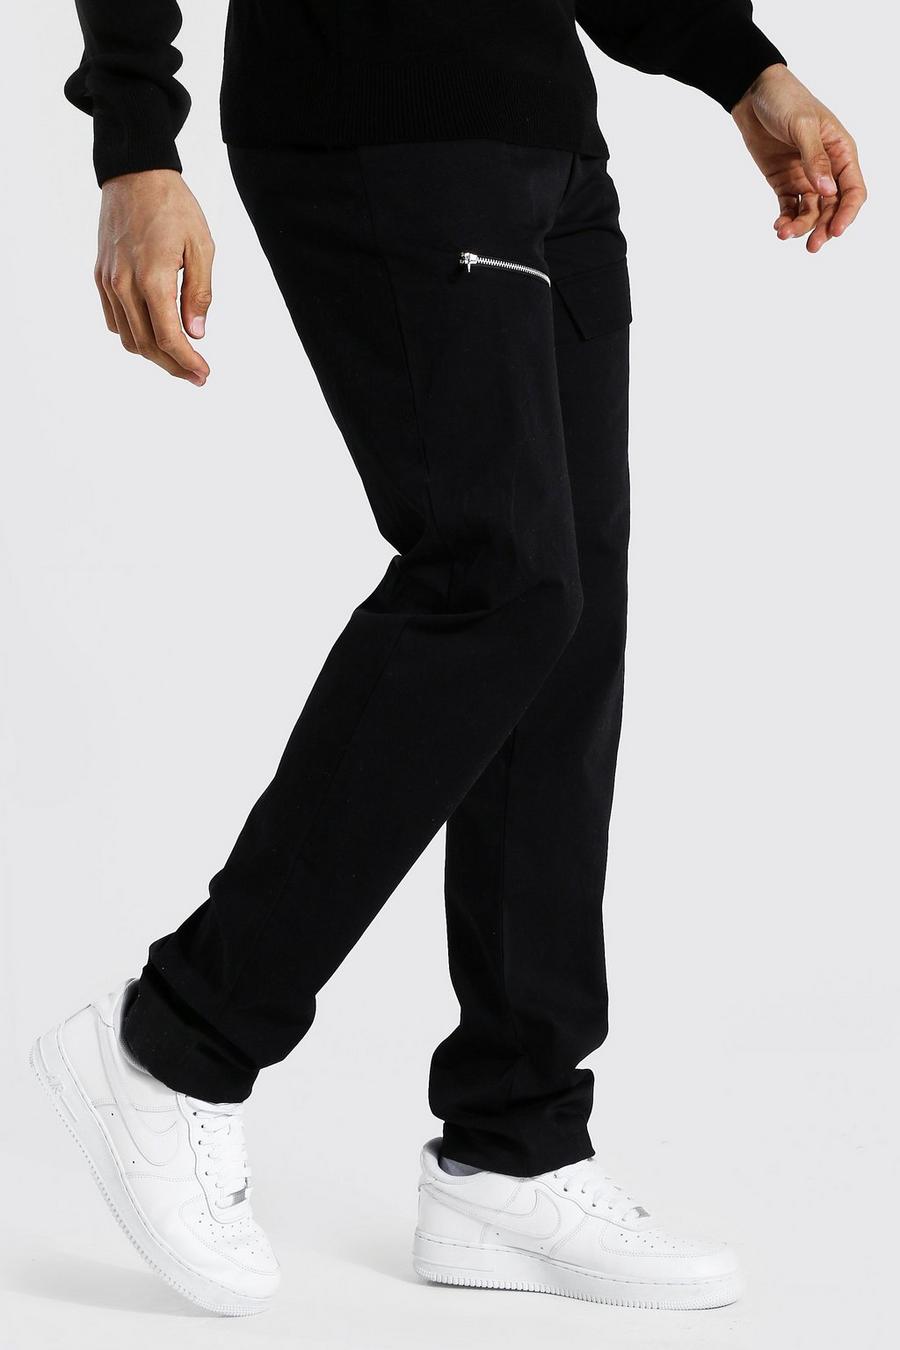 Black Tall Straight Leg Pants With Front Pockets image number 1